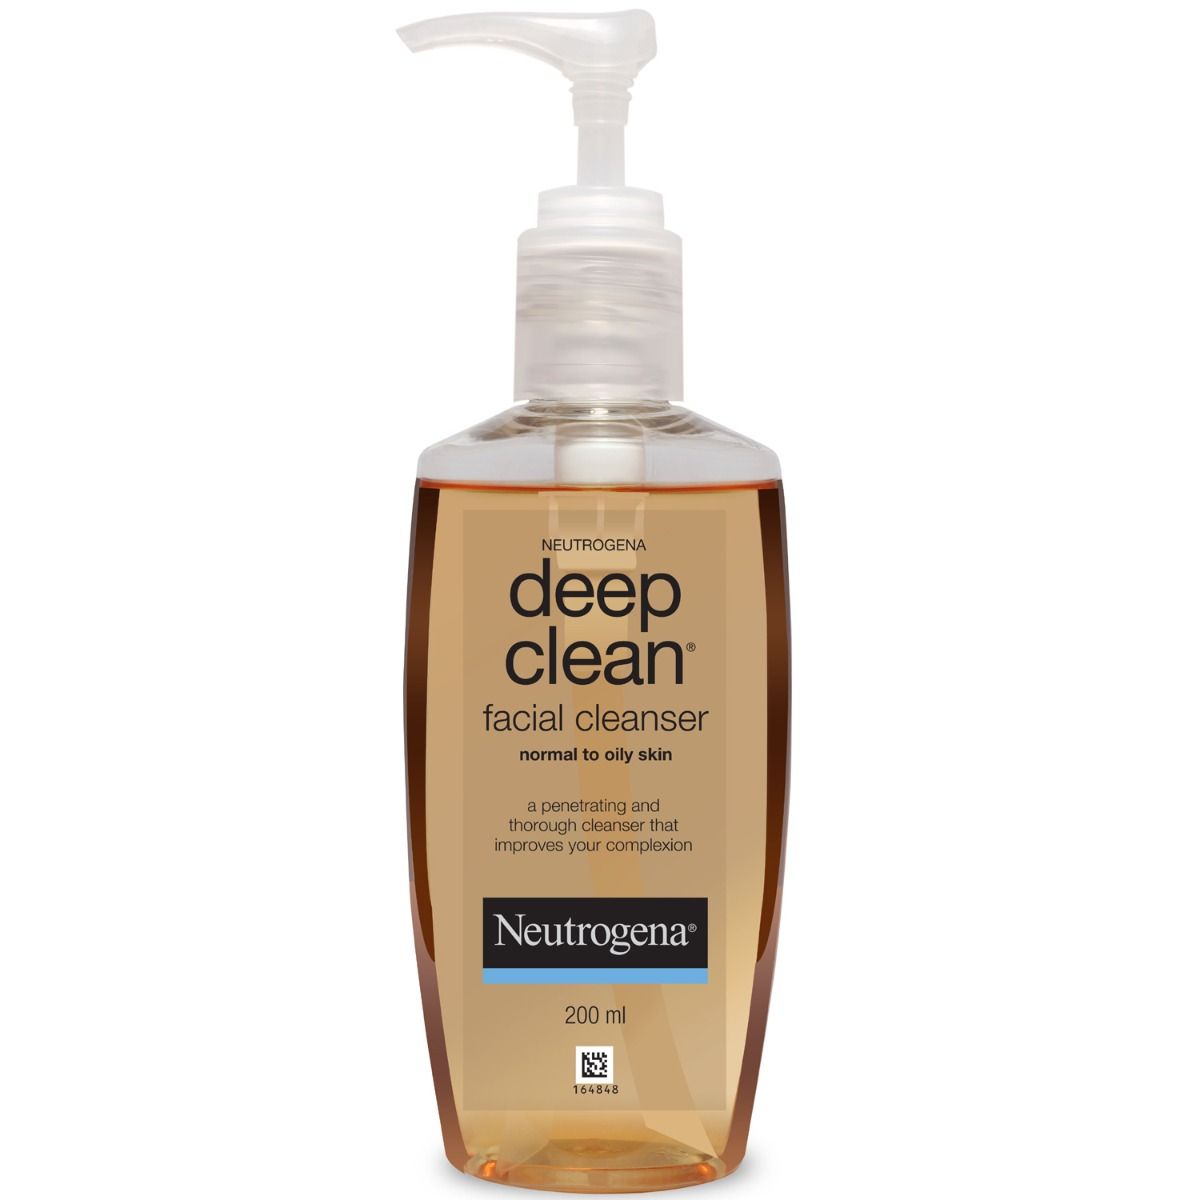 Neutrogena Deep Clean Facial Cleanser For Normal to Oily Skin, 200 ml, Pack of 1 